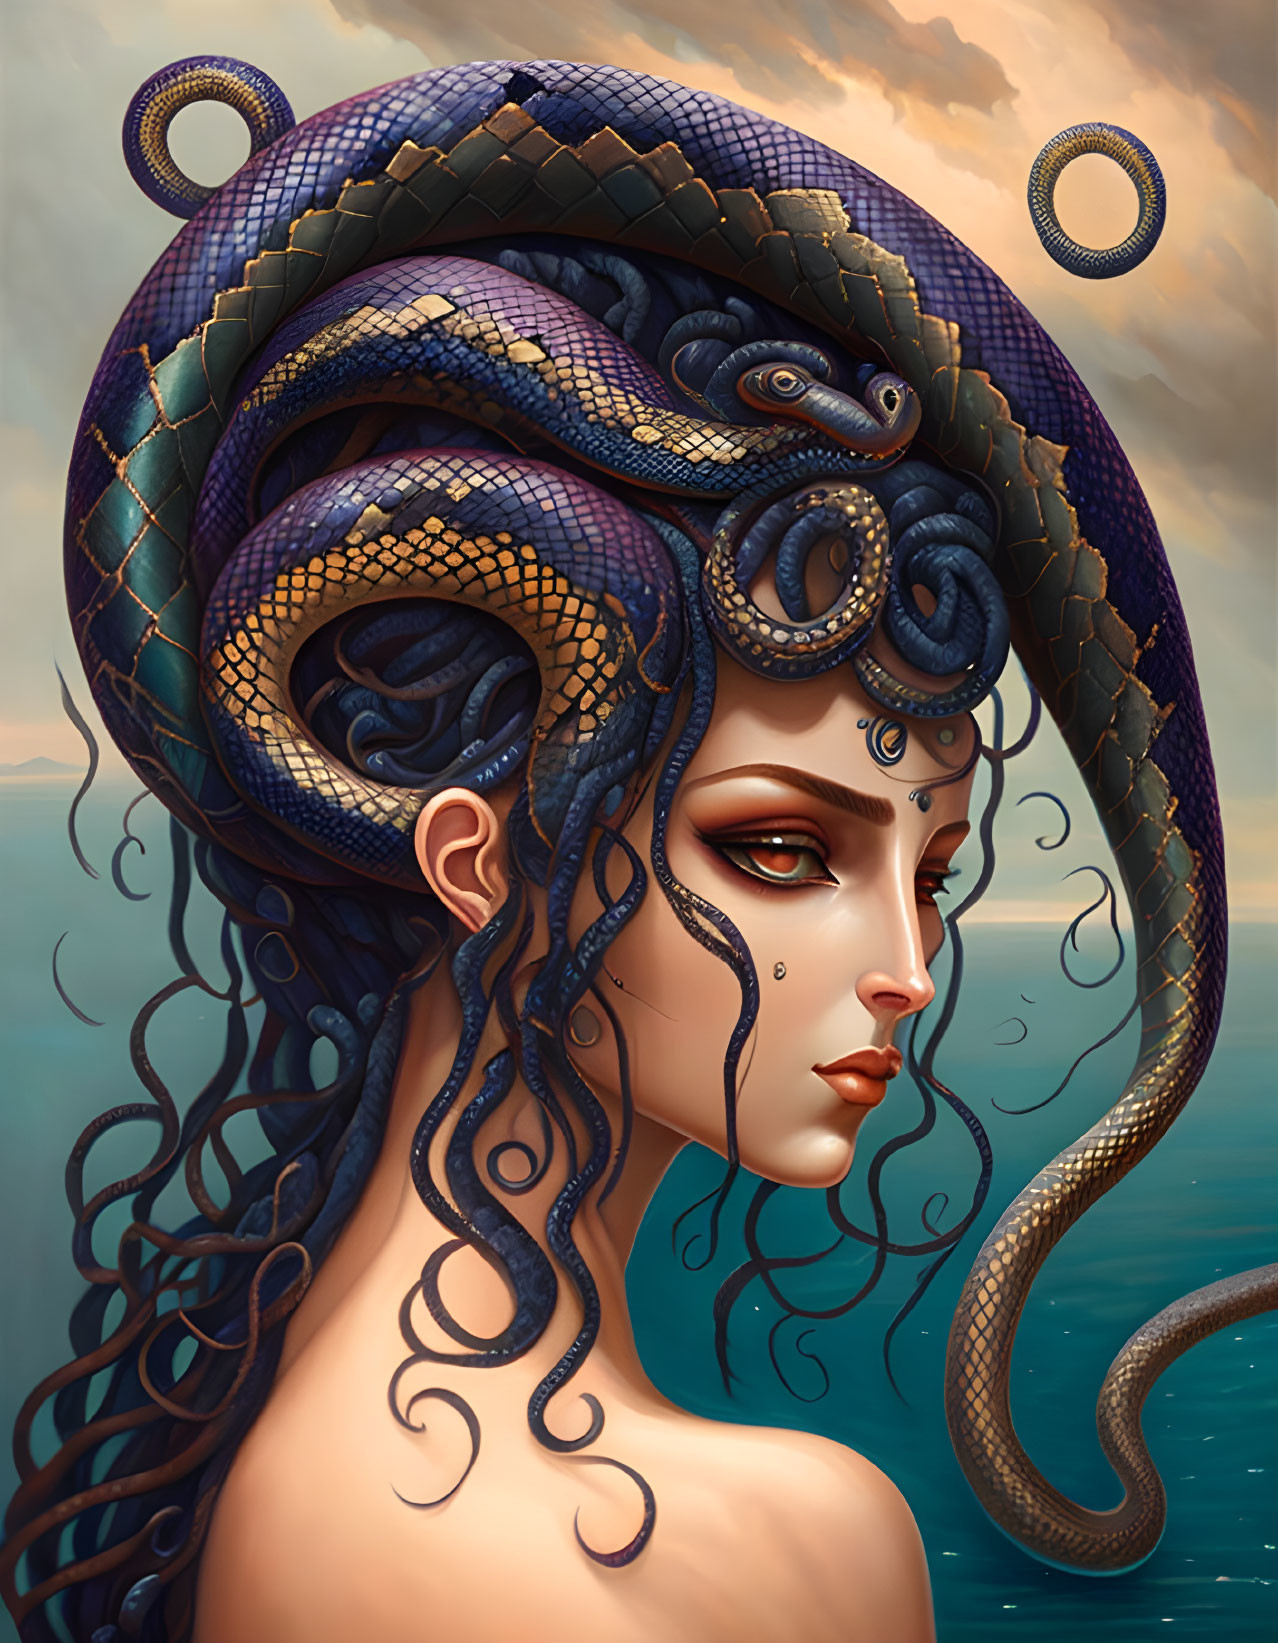 Woman with Serpentine Hair and Ocean Jewelry in Mythological Seascape